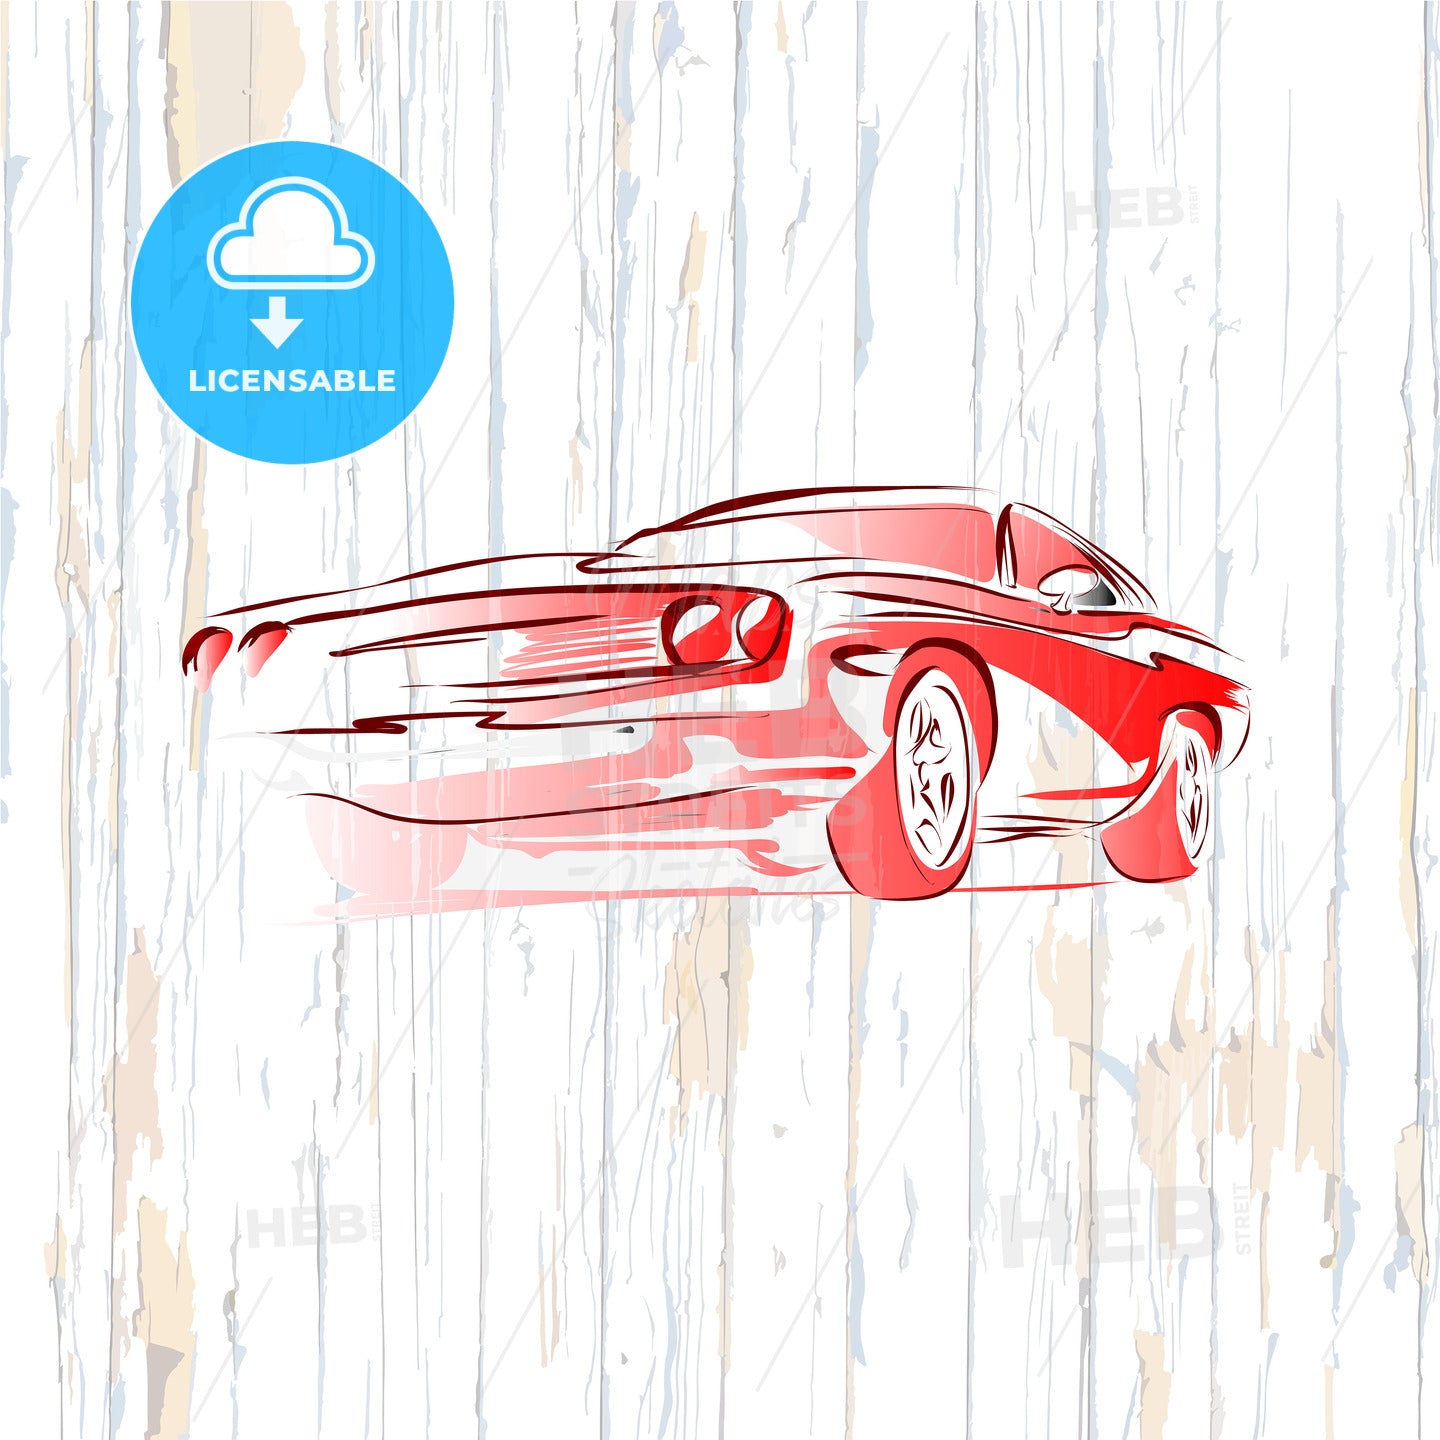 Vintage muscle car drawing on wooden background – instant download